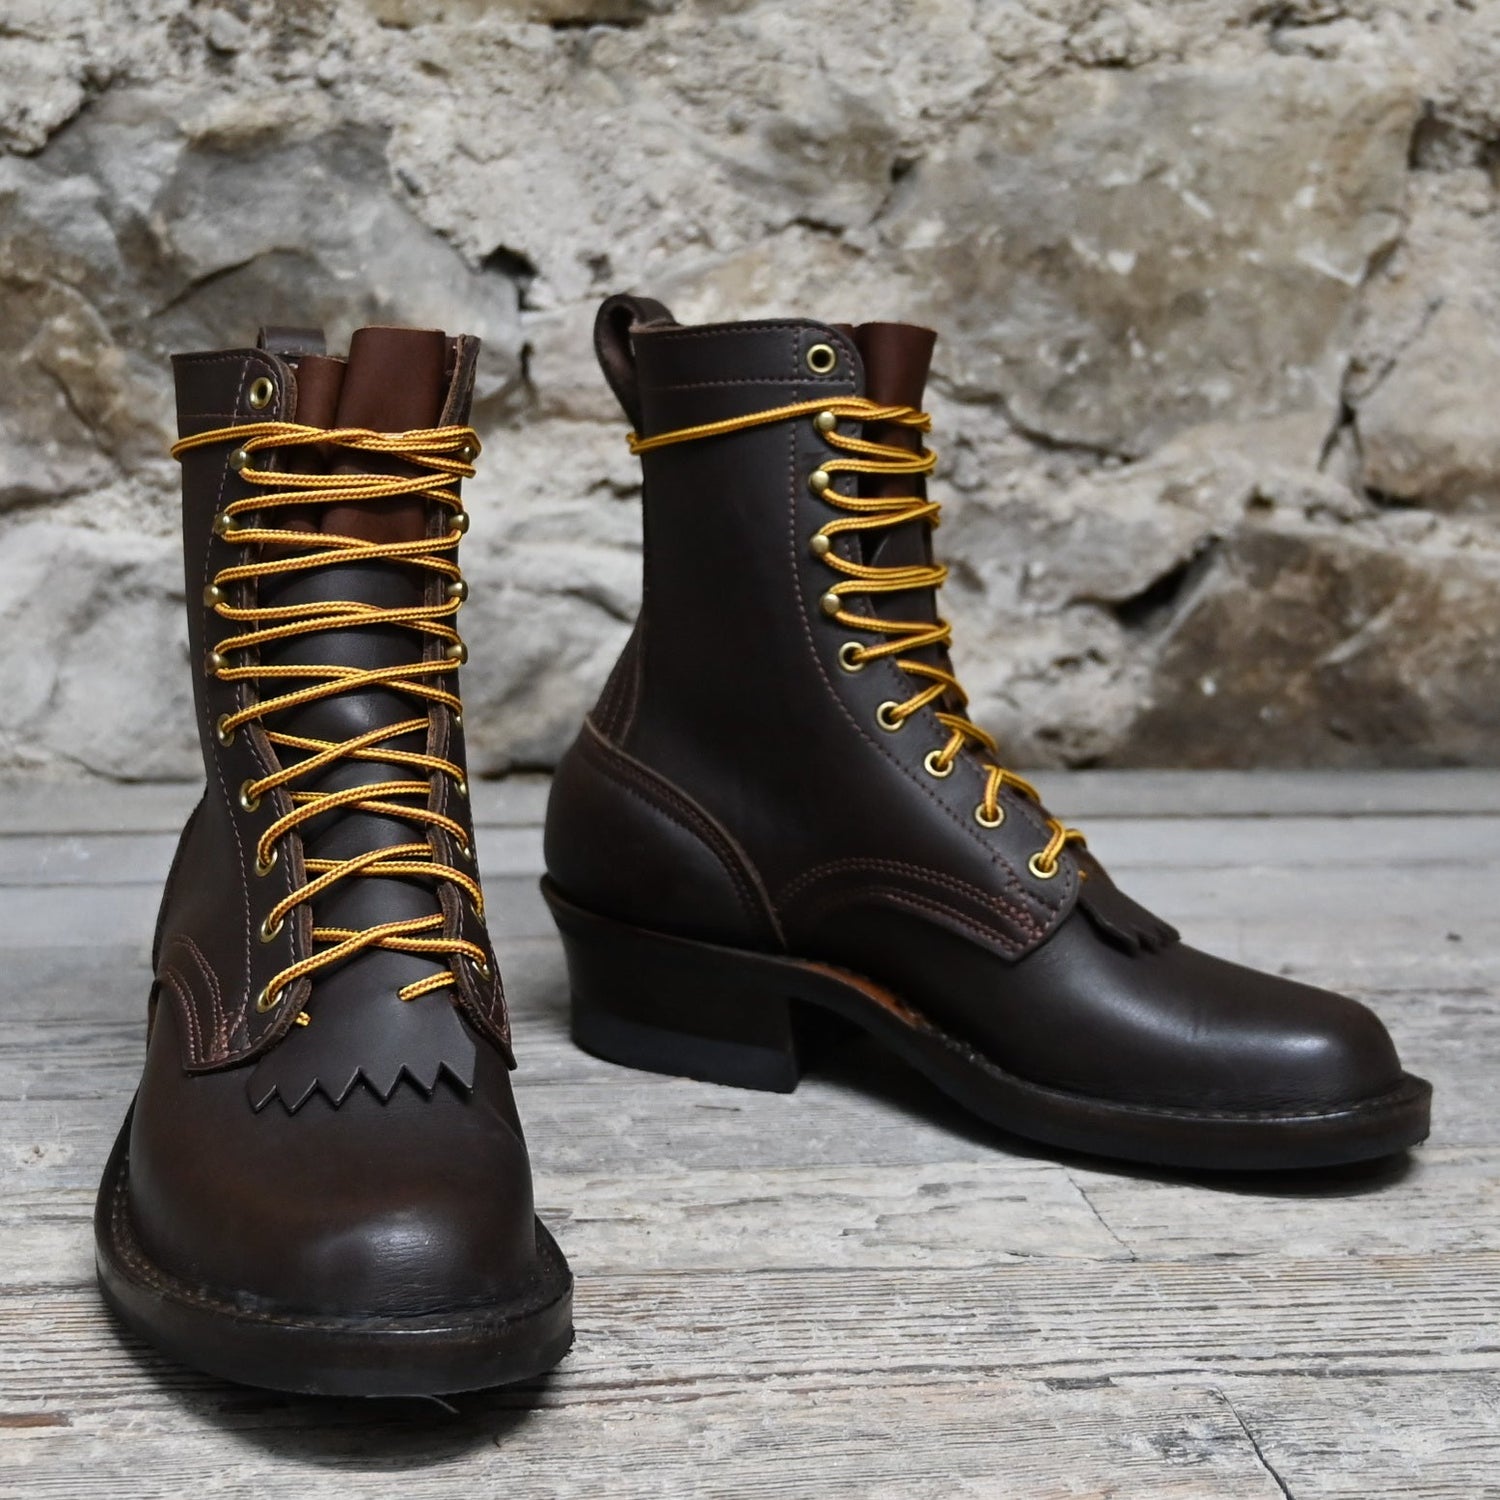 Nicks Leather Ranger Boot In Walnut view of front and side